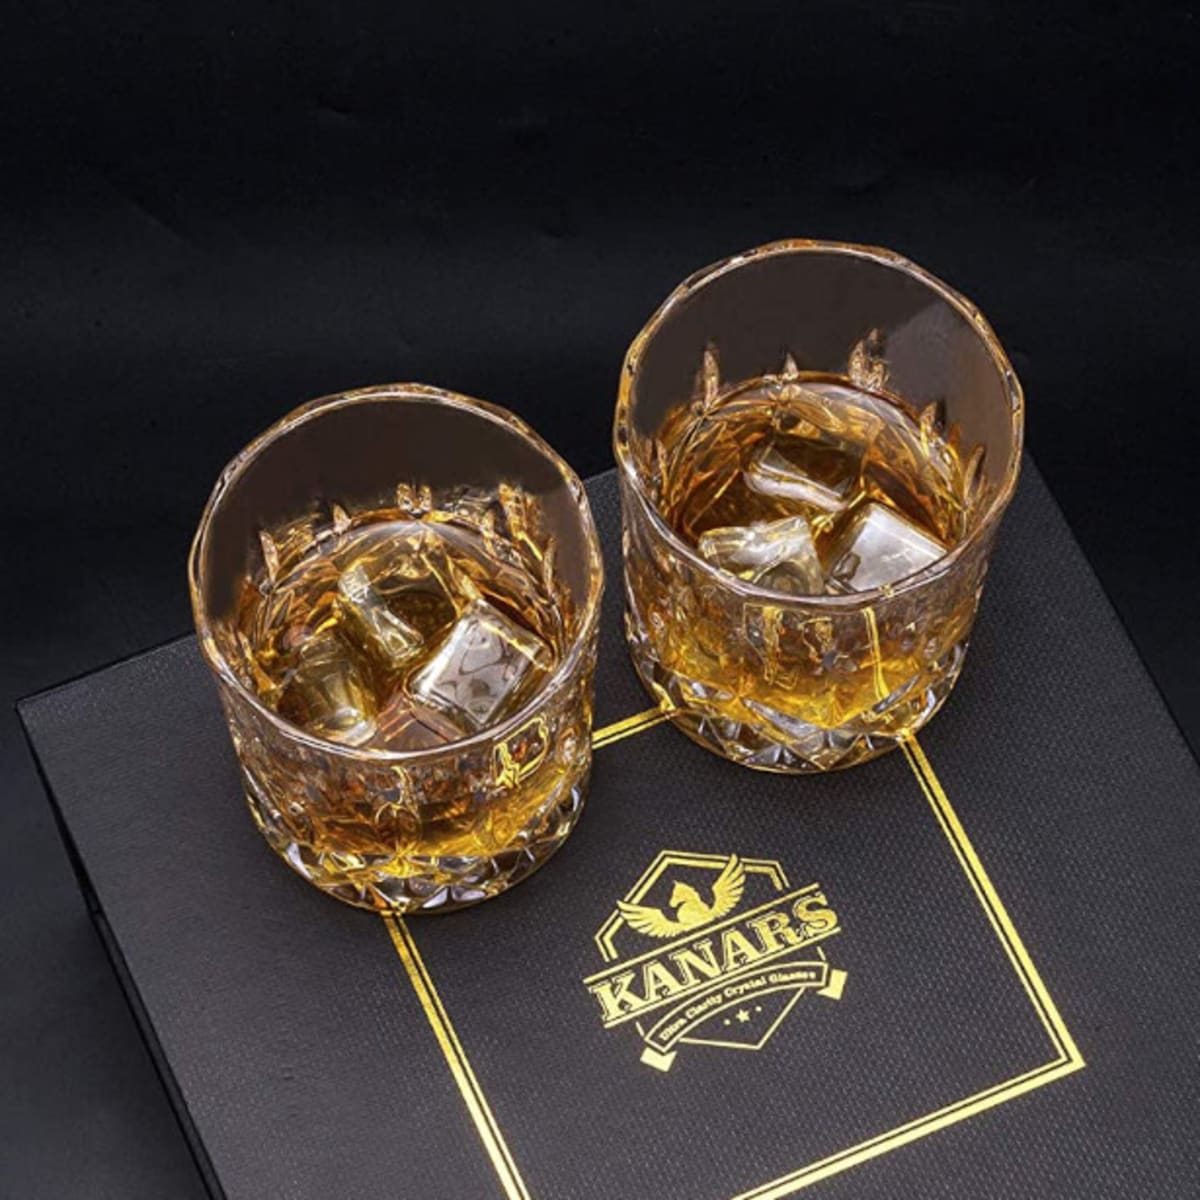 Whiskey Lover's Gift Set, Whiskey Accessories